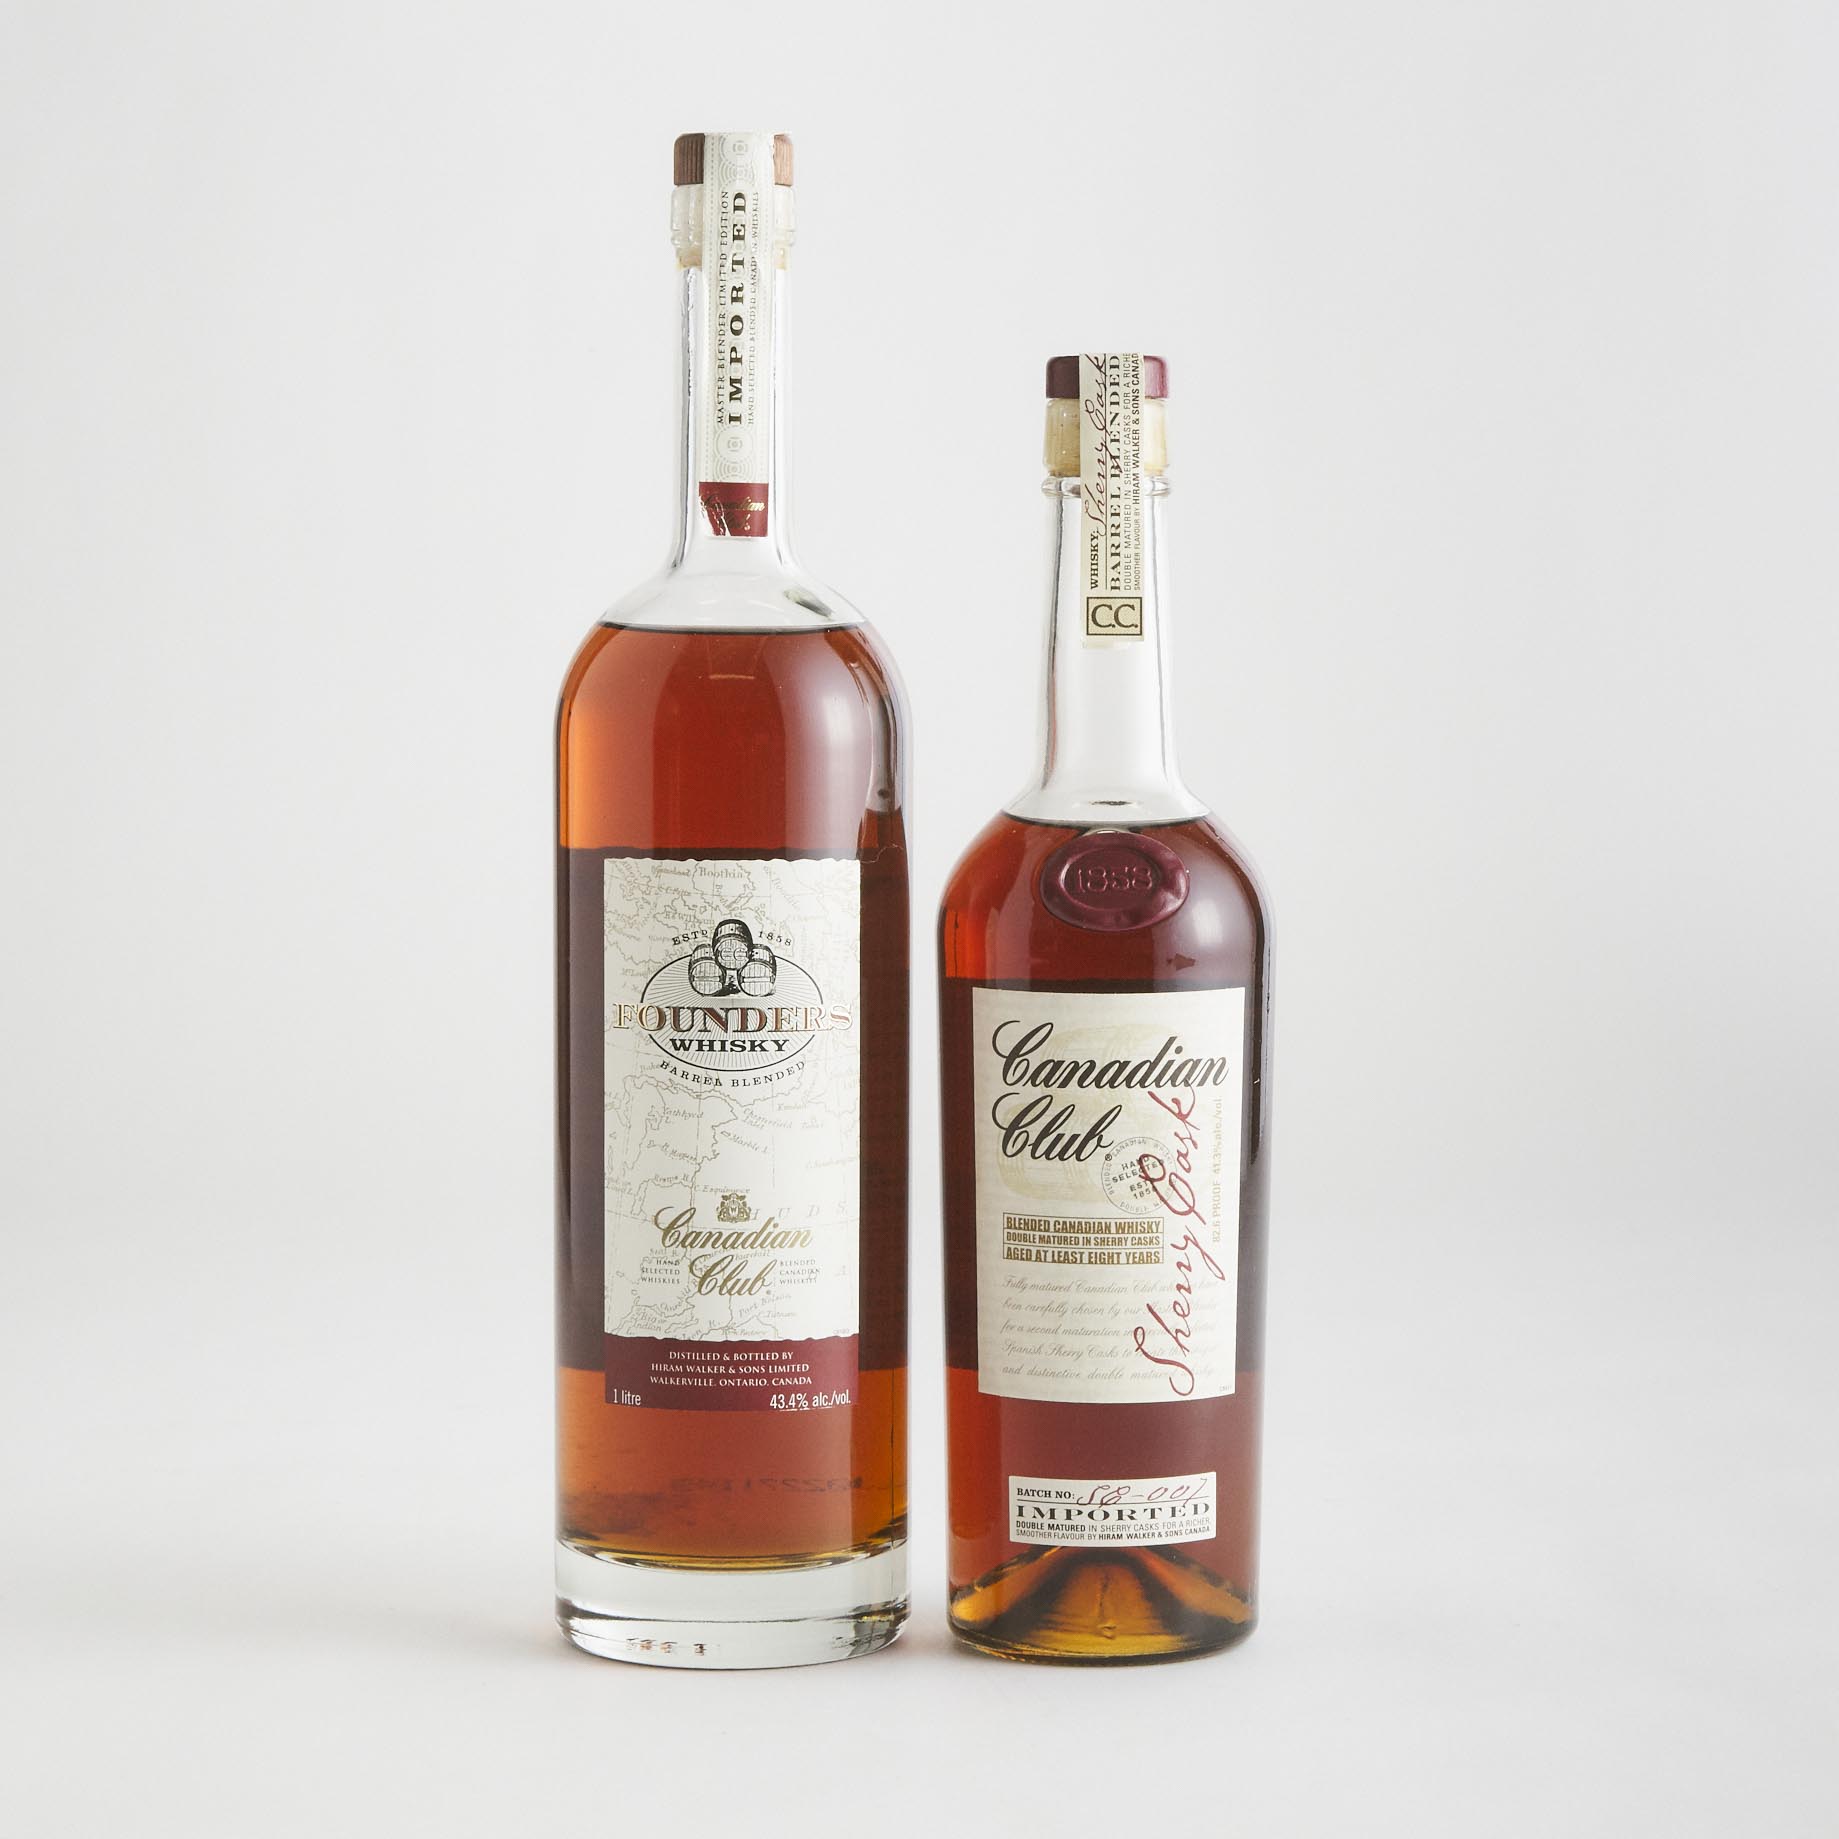 CANADIAN CLUB CANADIAN WHISKY (ONE 1000 ML)
CANADIAN CLUB CANADIAN WHISKY 8 YEARS (ONE 750 ML)